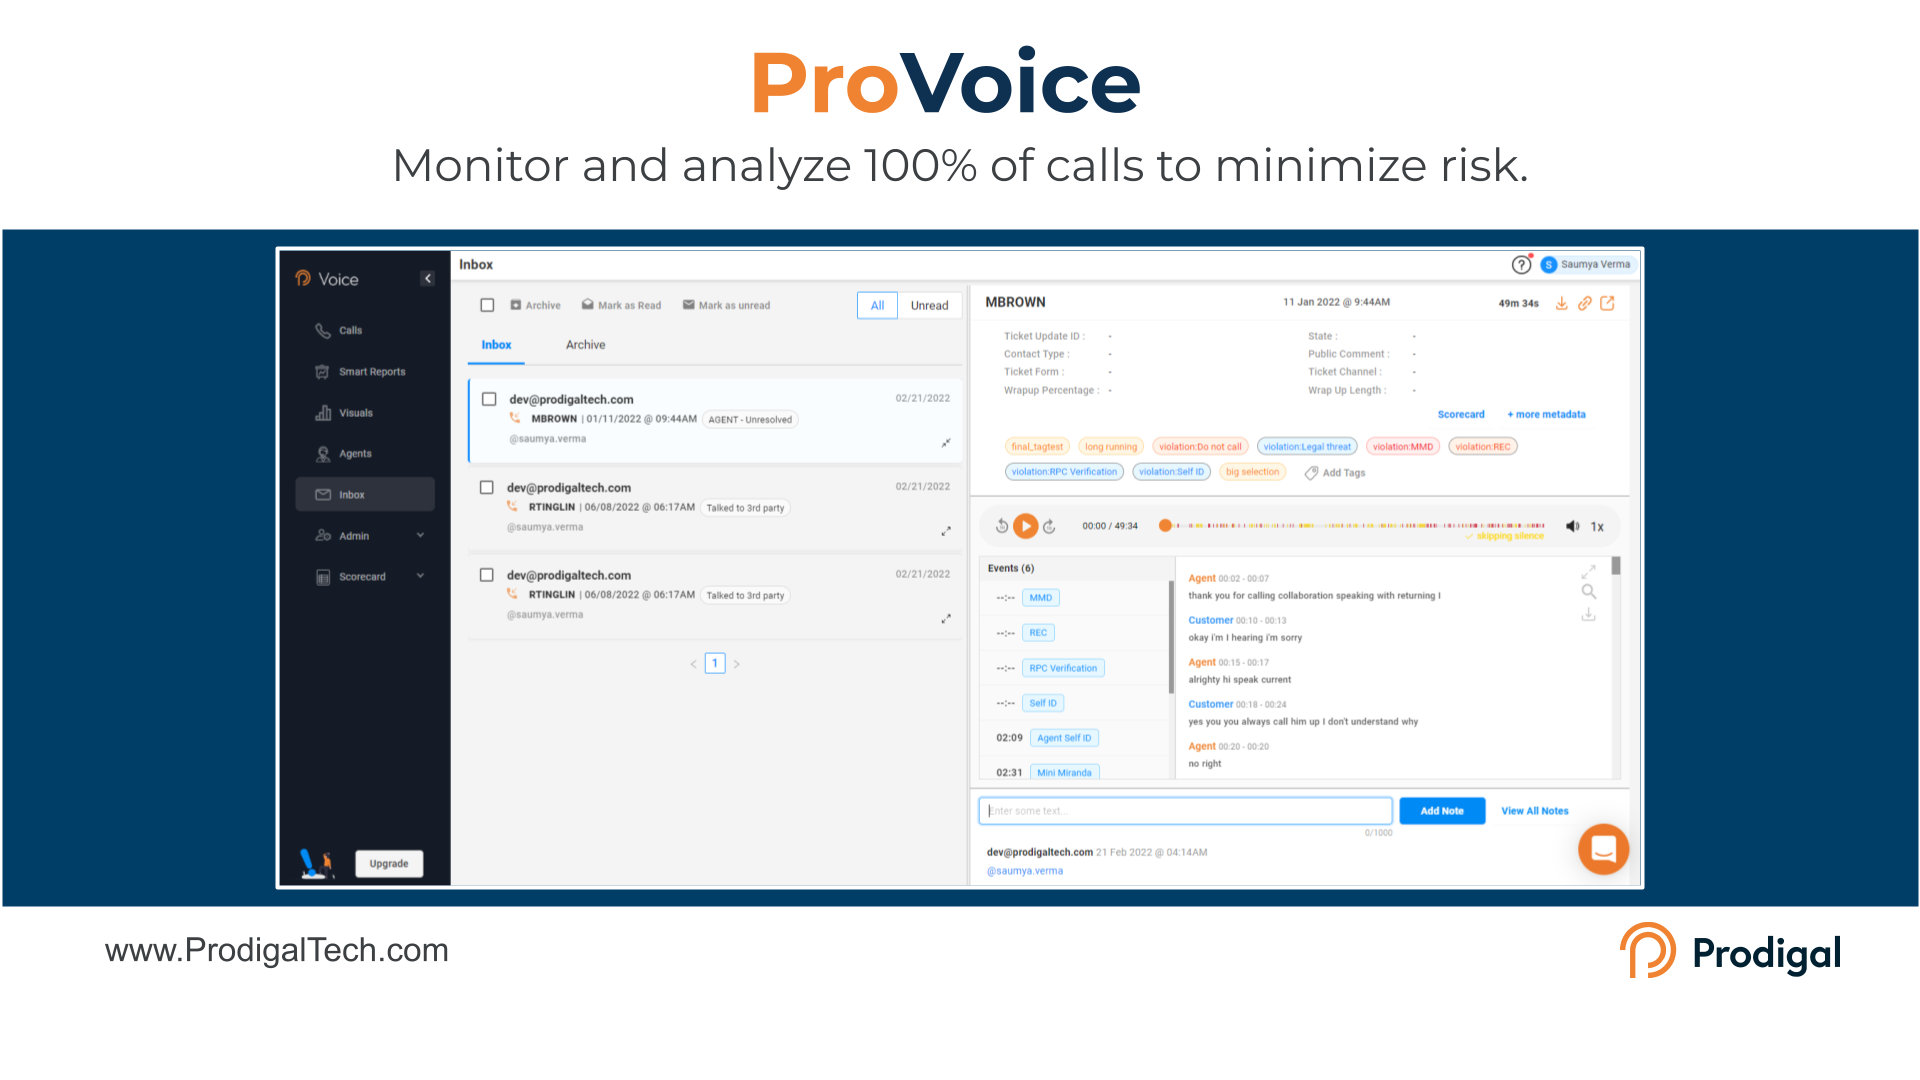 ProVoice analyzes and scores 100% of calls, slashing risk and supercharging QA effectiveness.